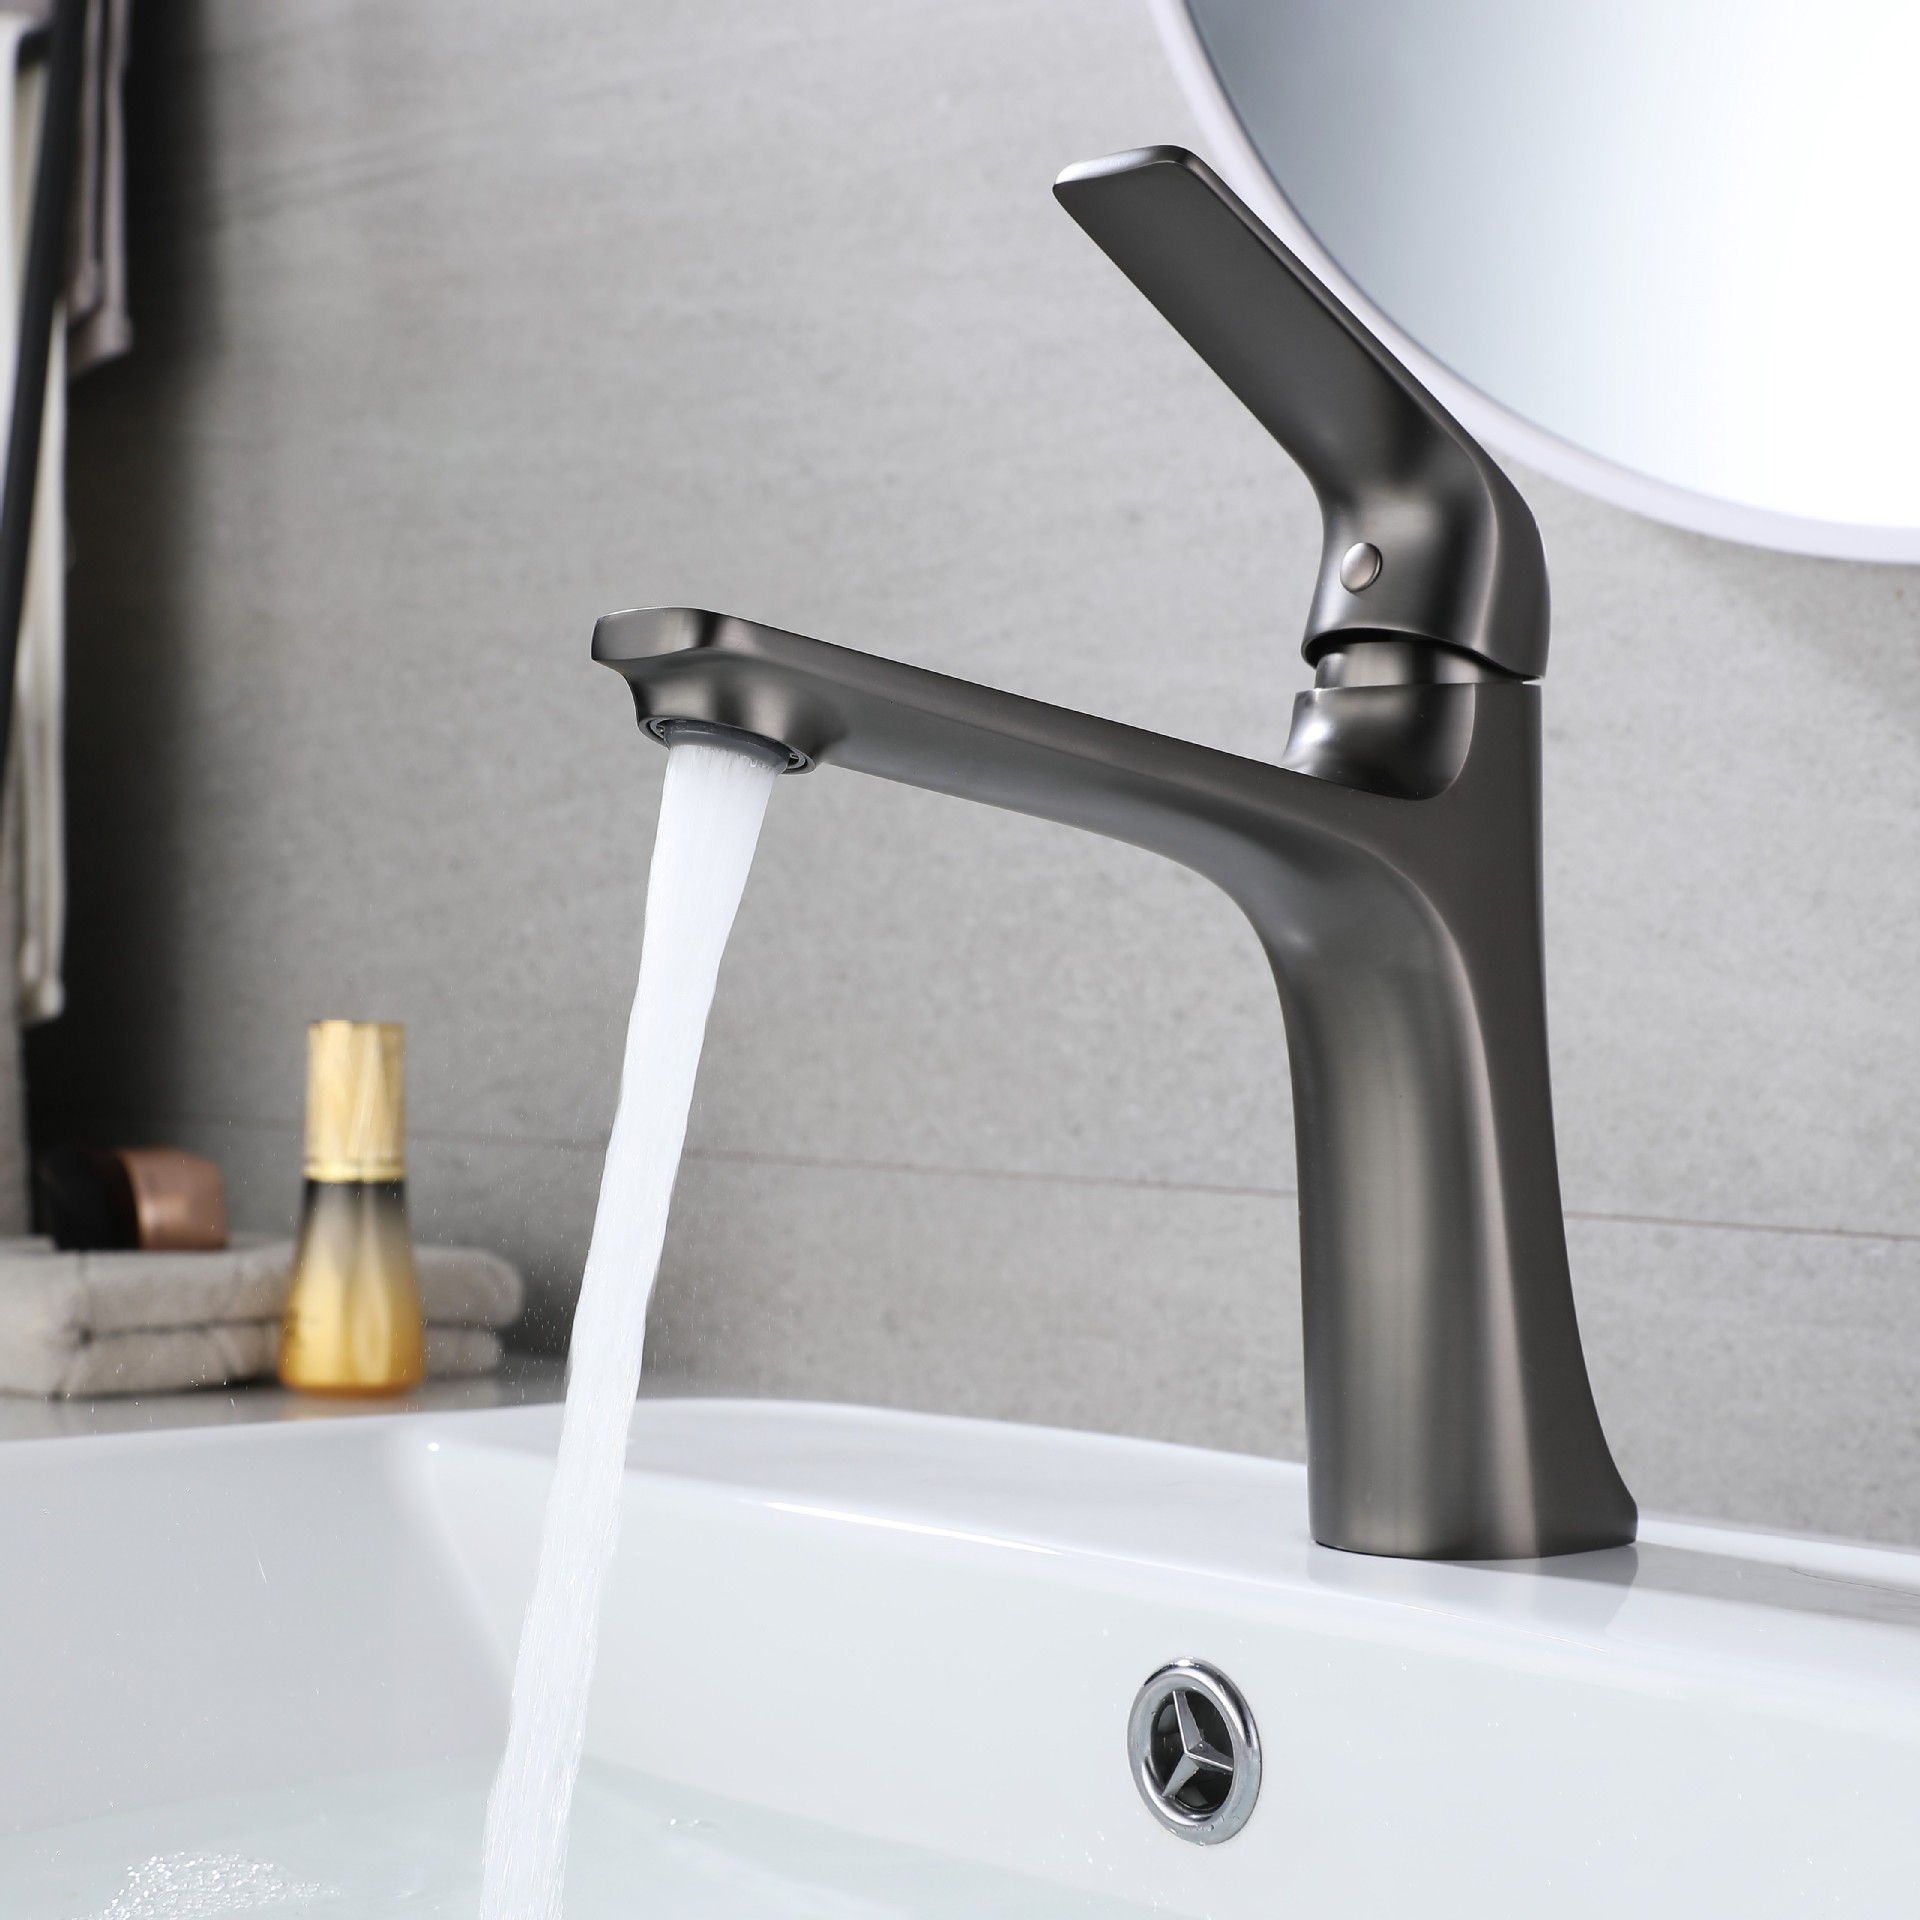 Minqian Bathroom Factory Washbasin Faucet Washstand Hot and Cold Basin Faucet Bathroom Ceramic Basin Faucet Wholesale Water Tap